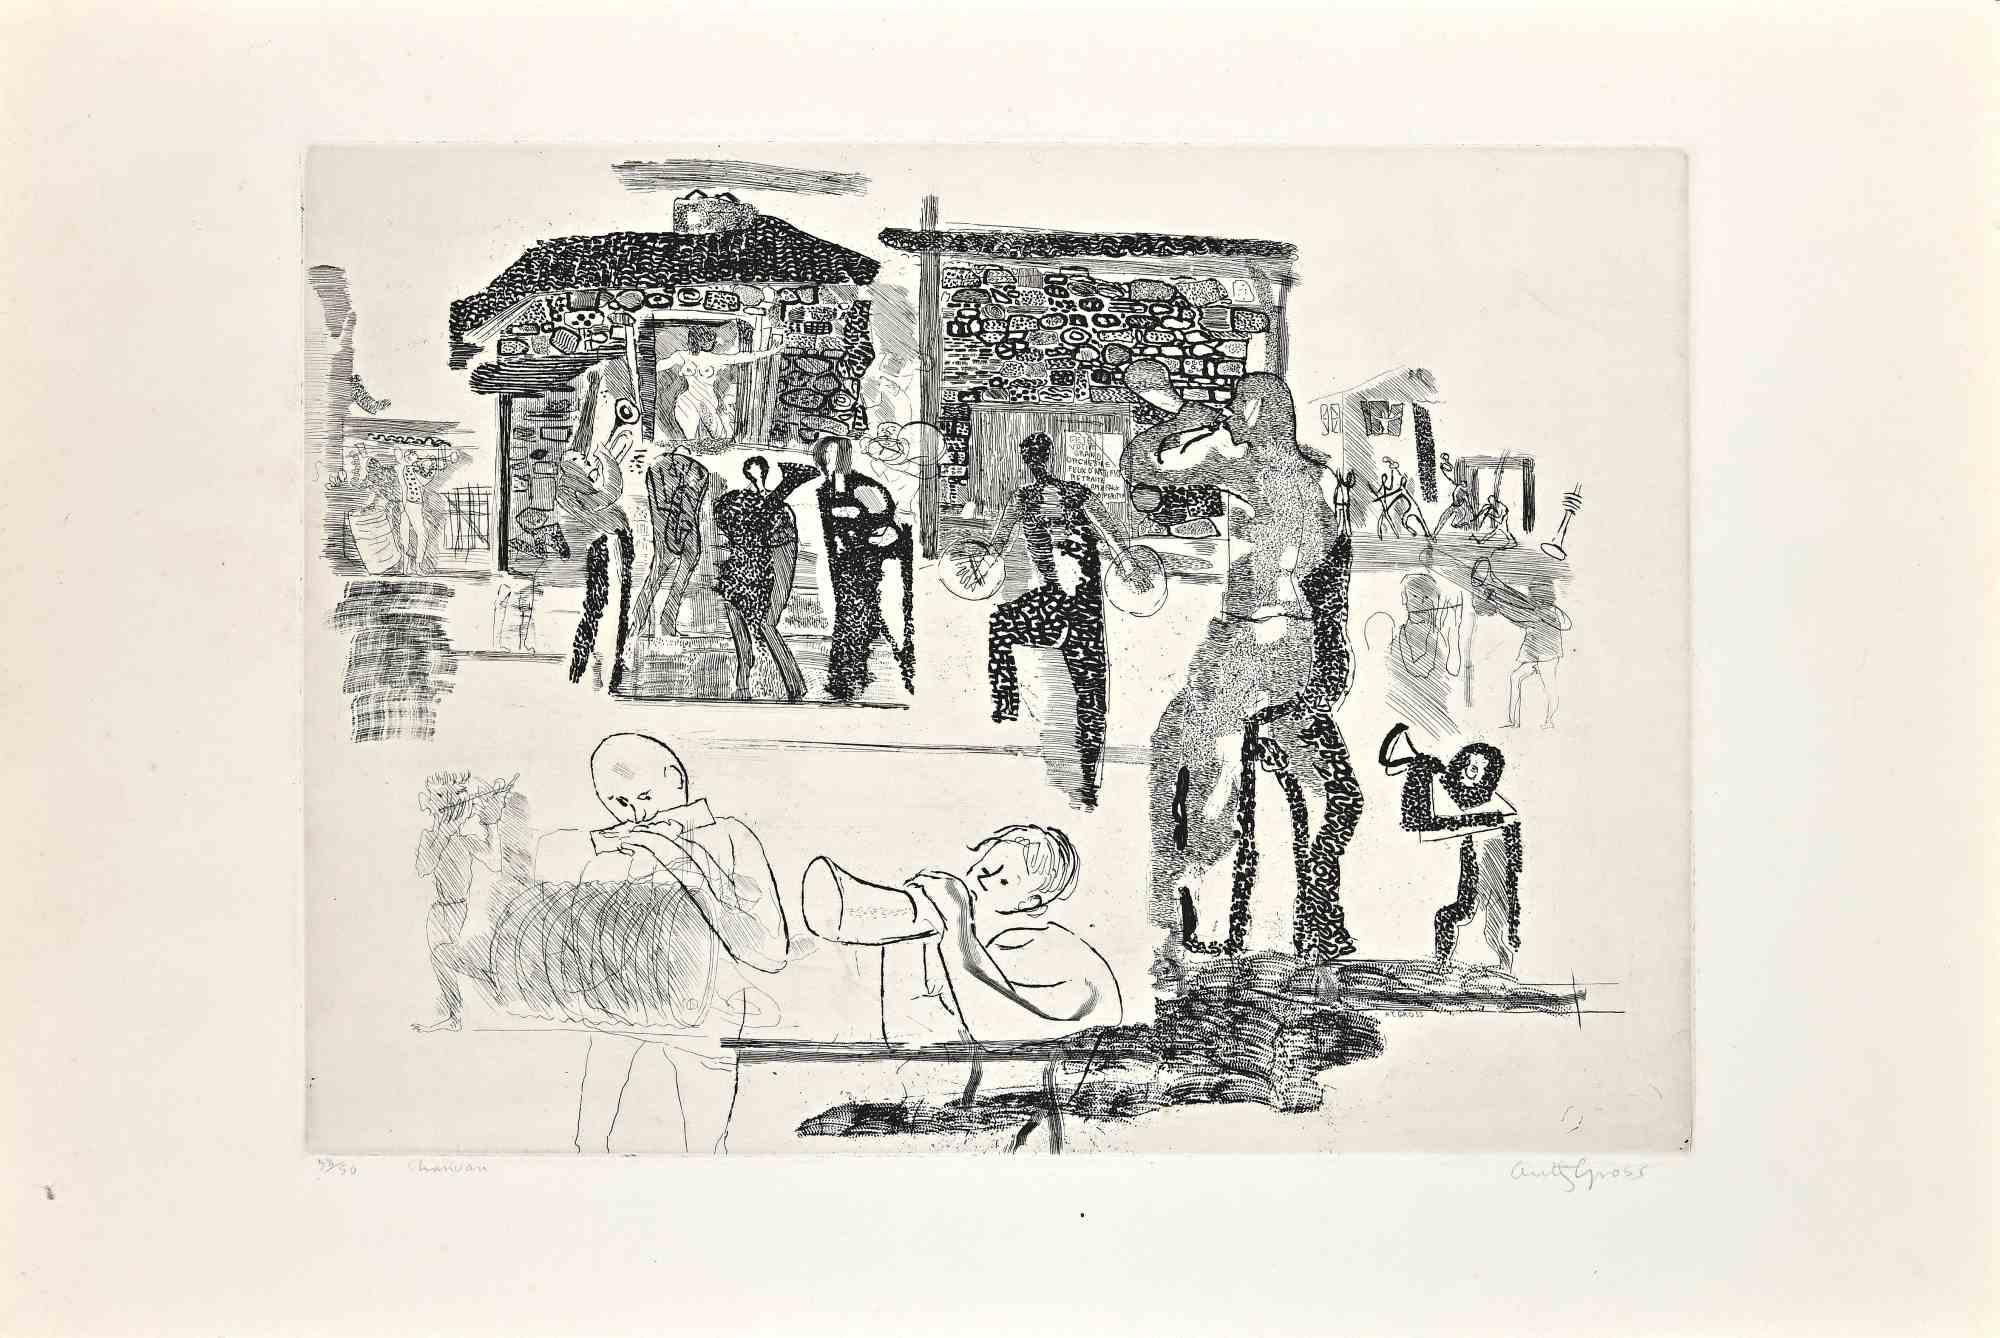 Carnival is an etching realized by Anthony Gross, in the second half of 20th century. 

Limited edition, 38/50.

Handsigned in the lower right part.

38 x 57 cm.

Good conditions.

 

Anthony Imre Alexander Gross CBE RA (19 March 1905 – 8 September